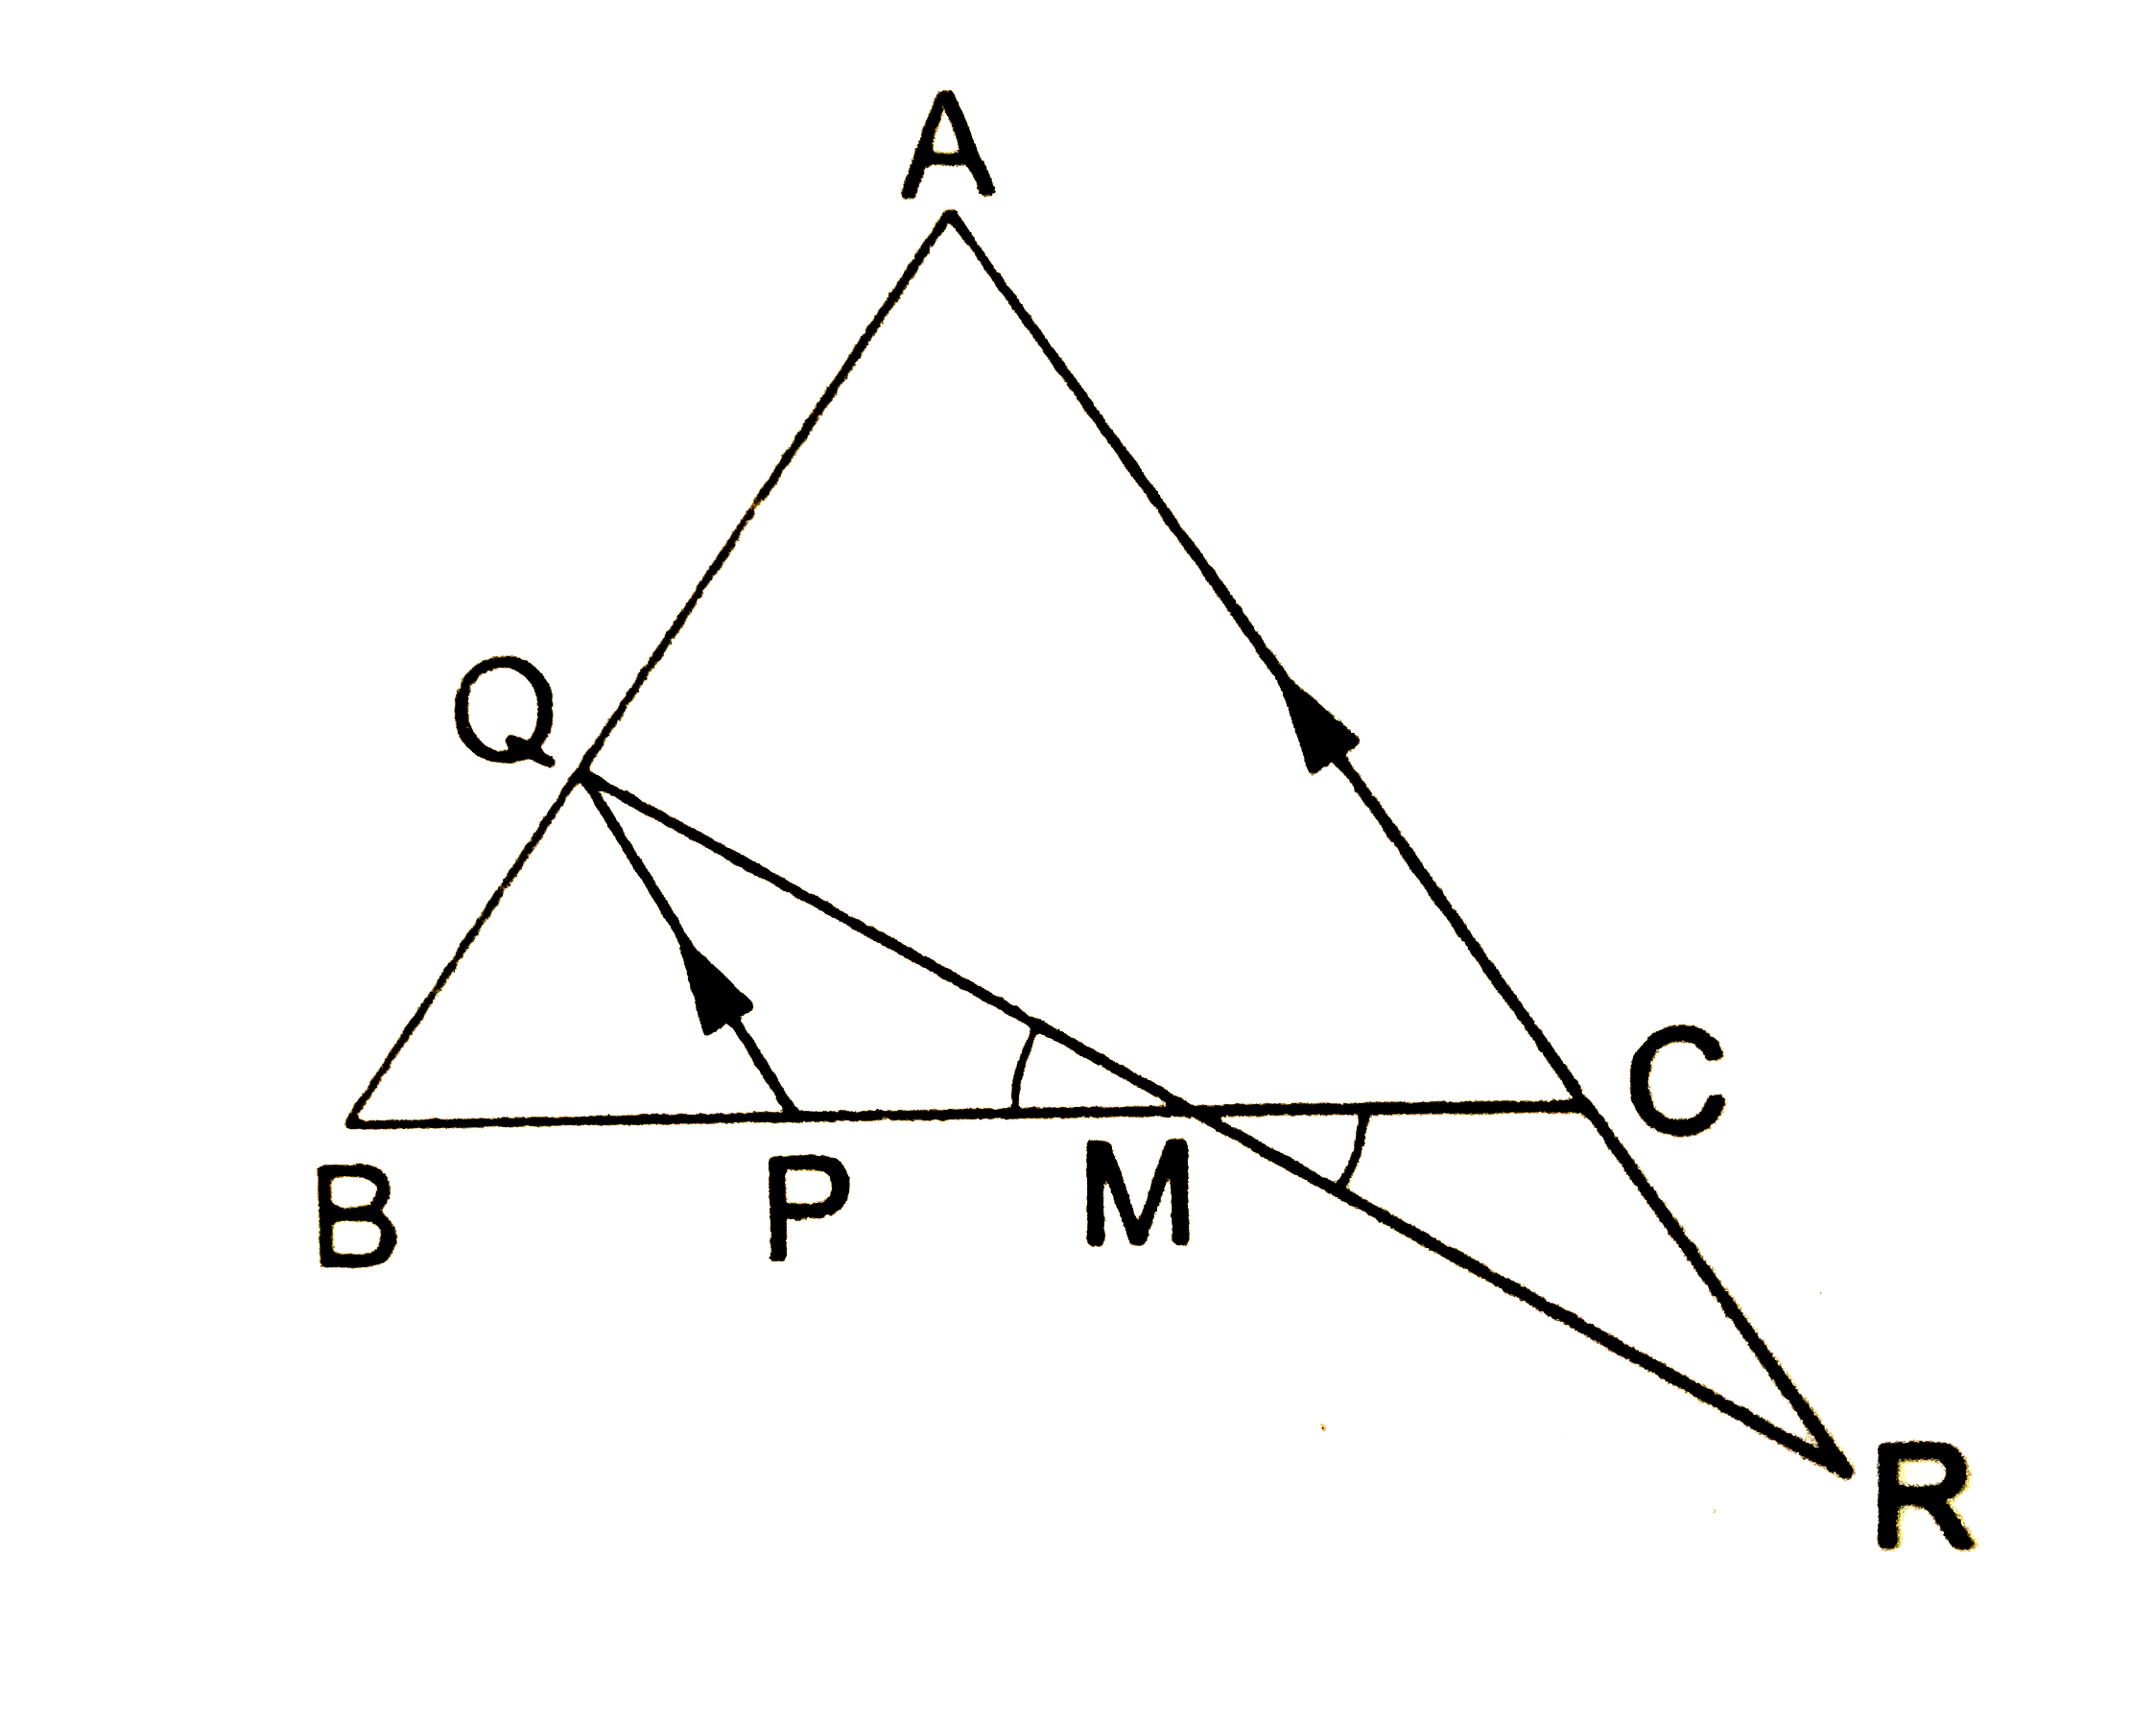 In the givne figure, ABC is an equilateral triangle, PQ